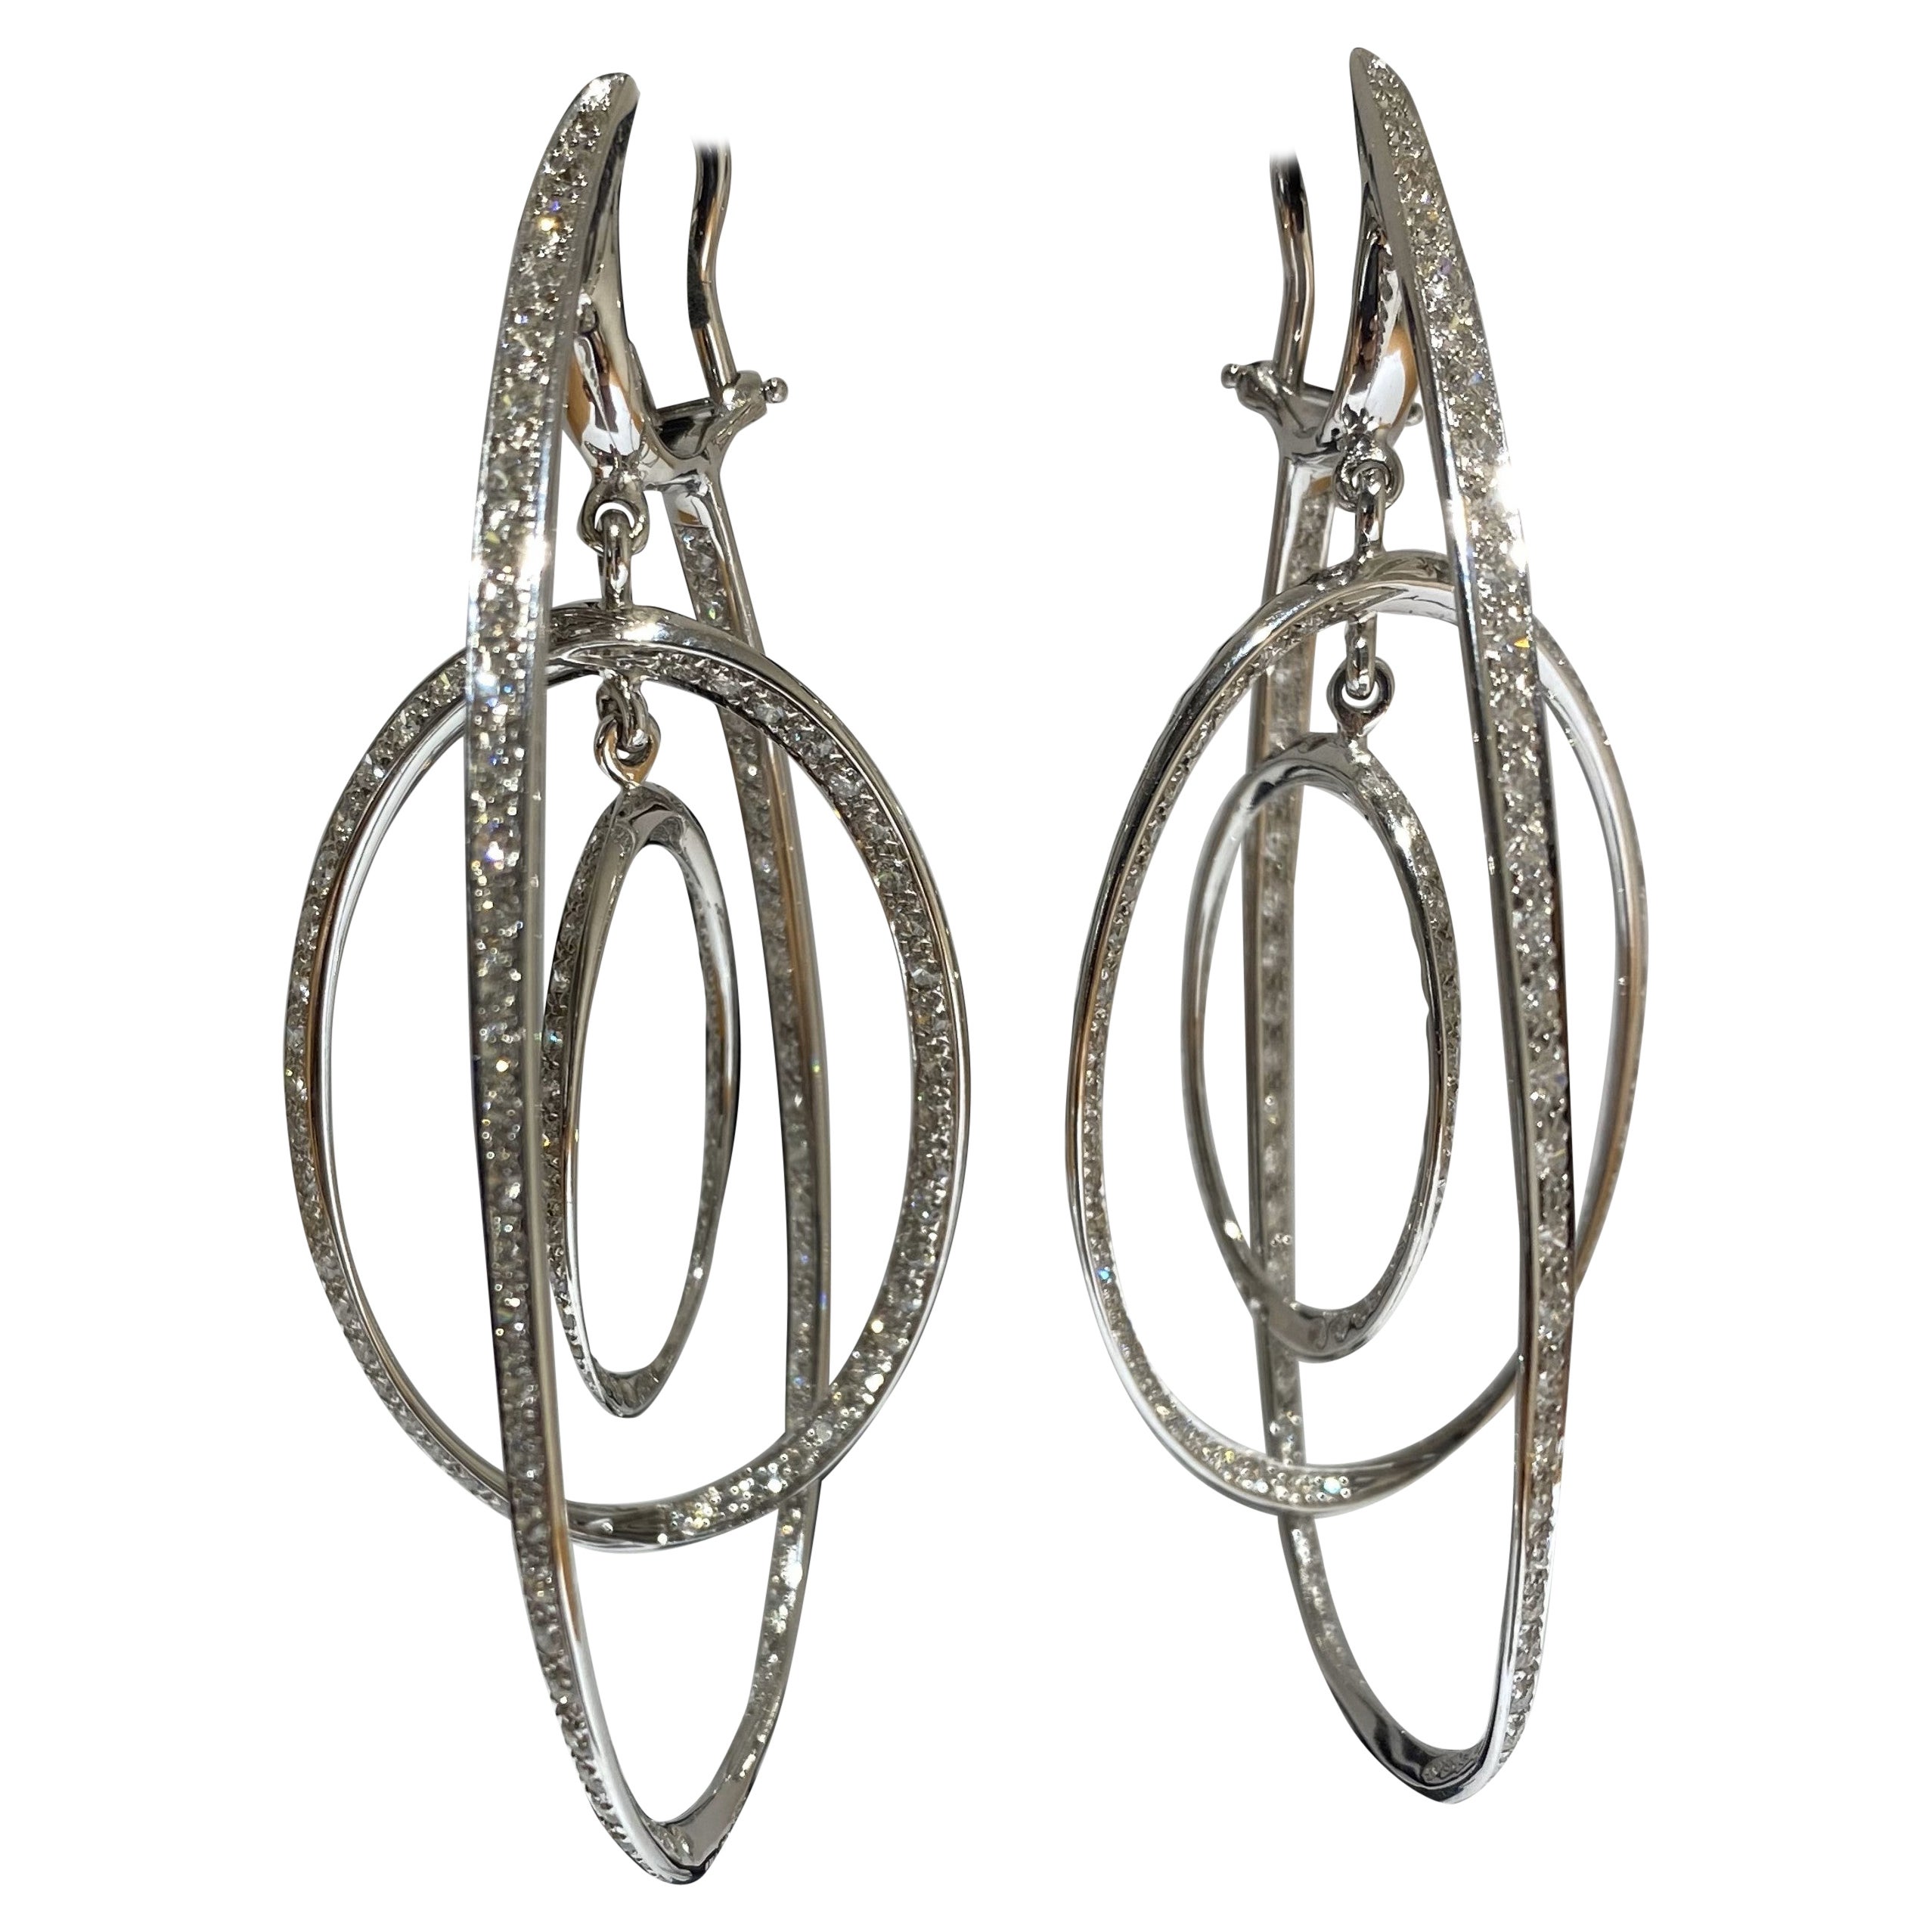 Introducing the ASTROLABIO Earrings by the renowned Italian master jeweler, Fulvio Maria Scavia. Meticulously crafted in Italy, these exquisite earrings showcase the unparalleled artistry of the designer. Fashioned in radiant white gold, the